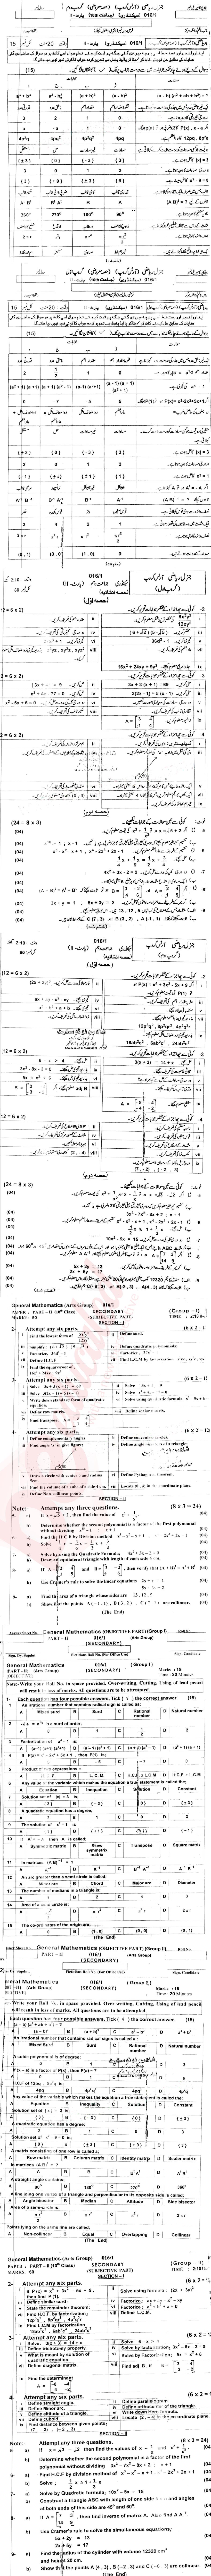 General Math 10th class Past Paper Group 1 BISE AJK 2016